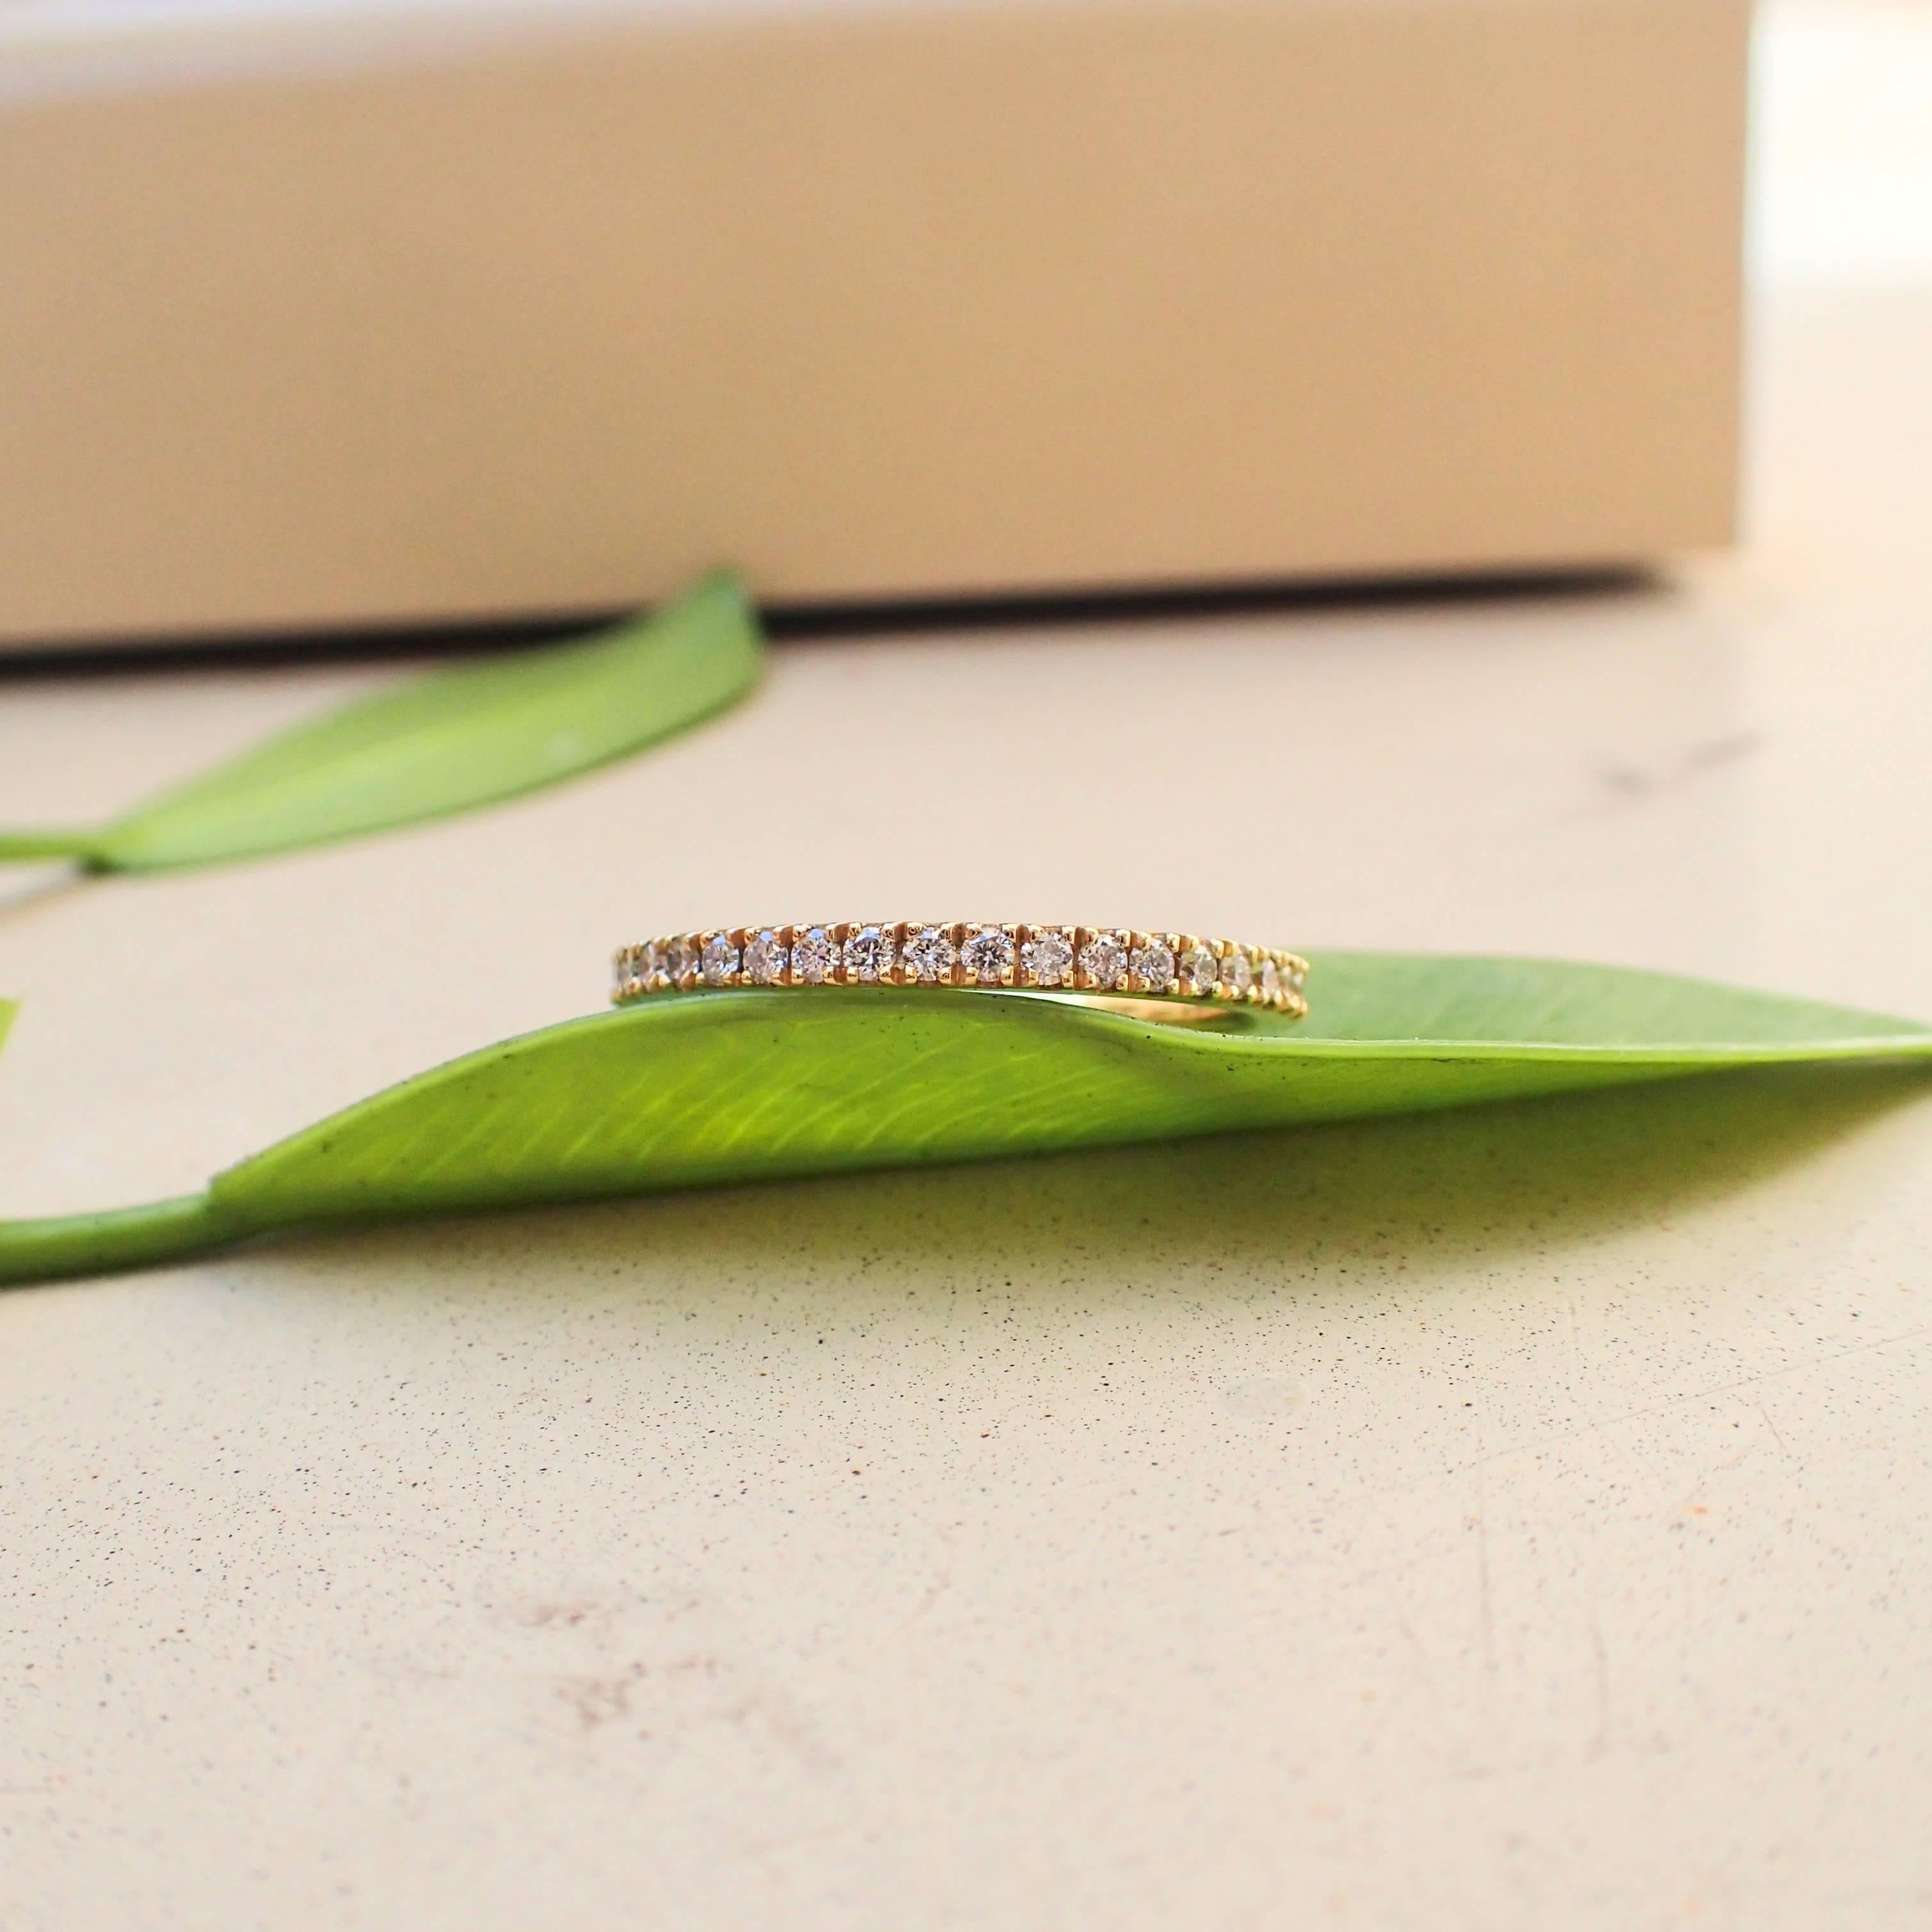 18k yellow gold eternity band is set with forty (40) Round Brilliant Cut diamonds that measure 1.3mm and weigh a total of 0.40 carats with Clarity Grade VS and Color Grade G. The ring is a size 6 1/2 and weighs 1.7 grams (1 pennyweight).

At By